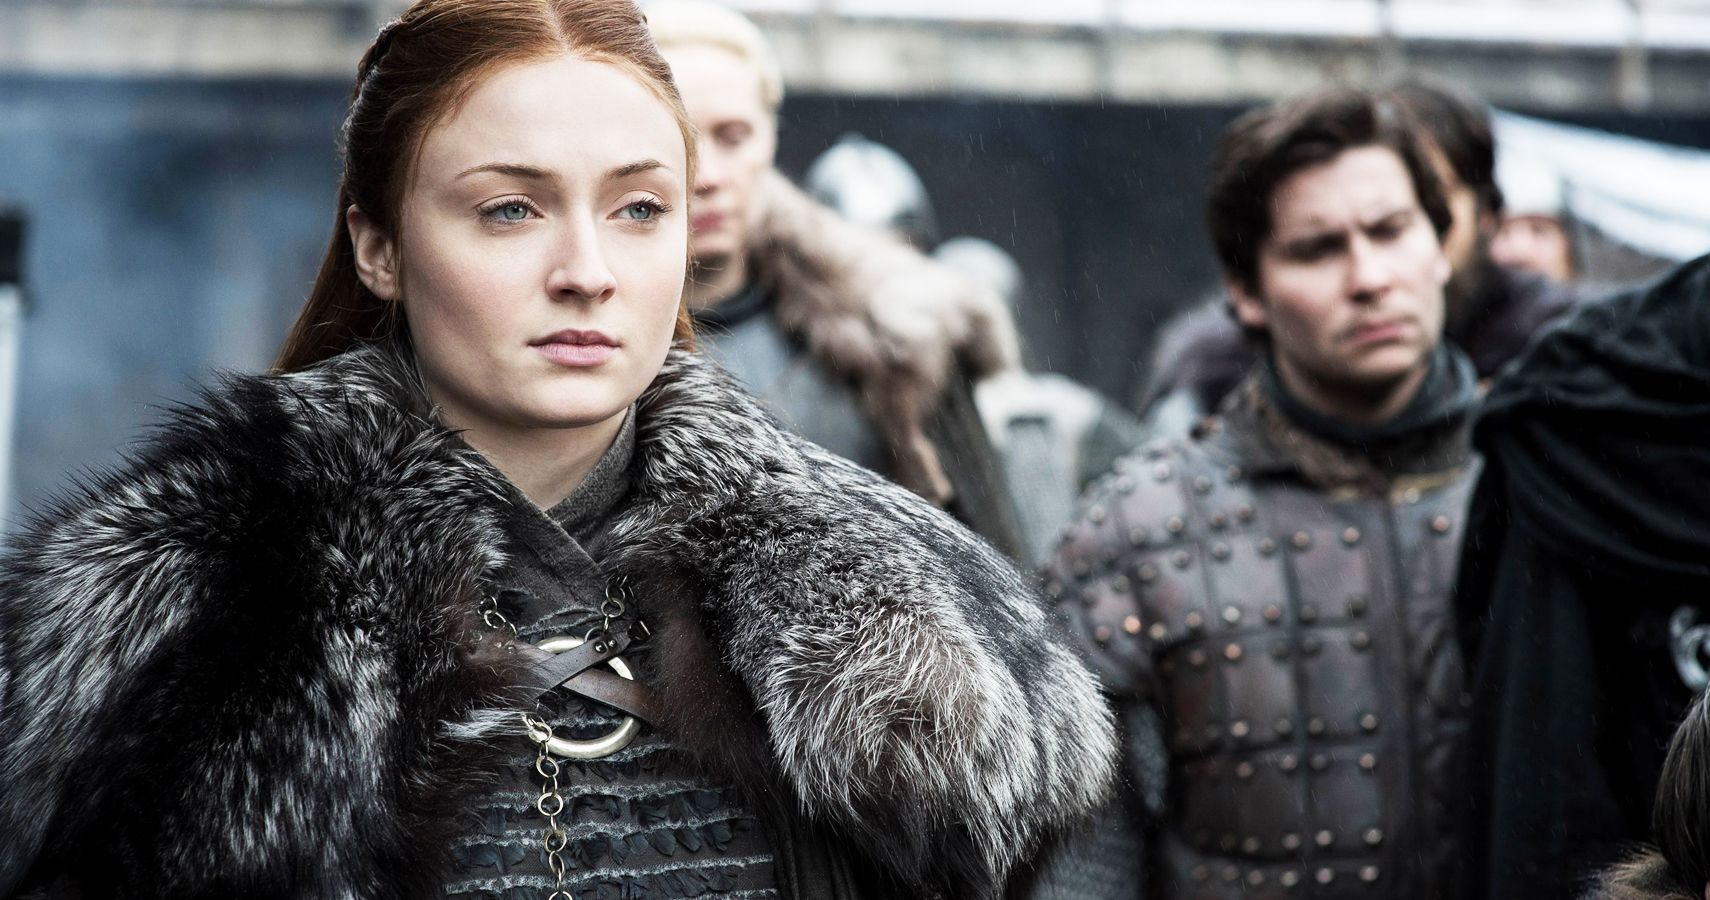 Game Of Thrones 5 Times We Felt Bad For Sansa Stark (And 5 Times We Hated Her)